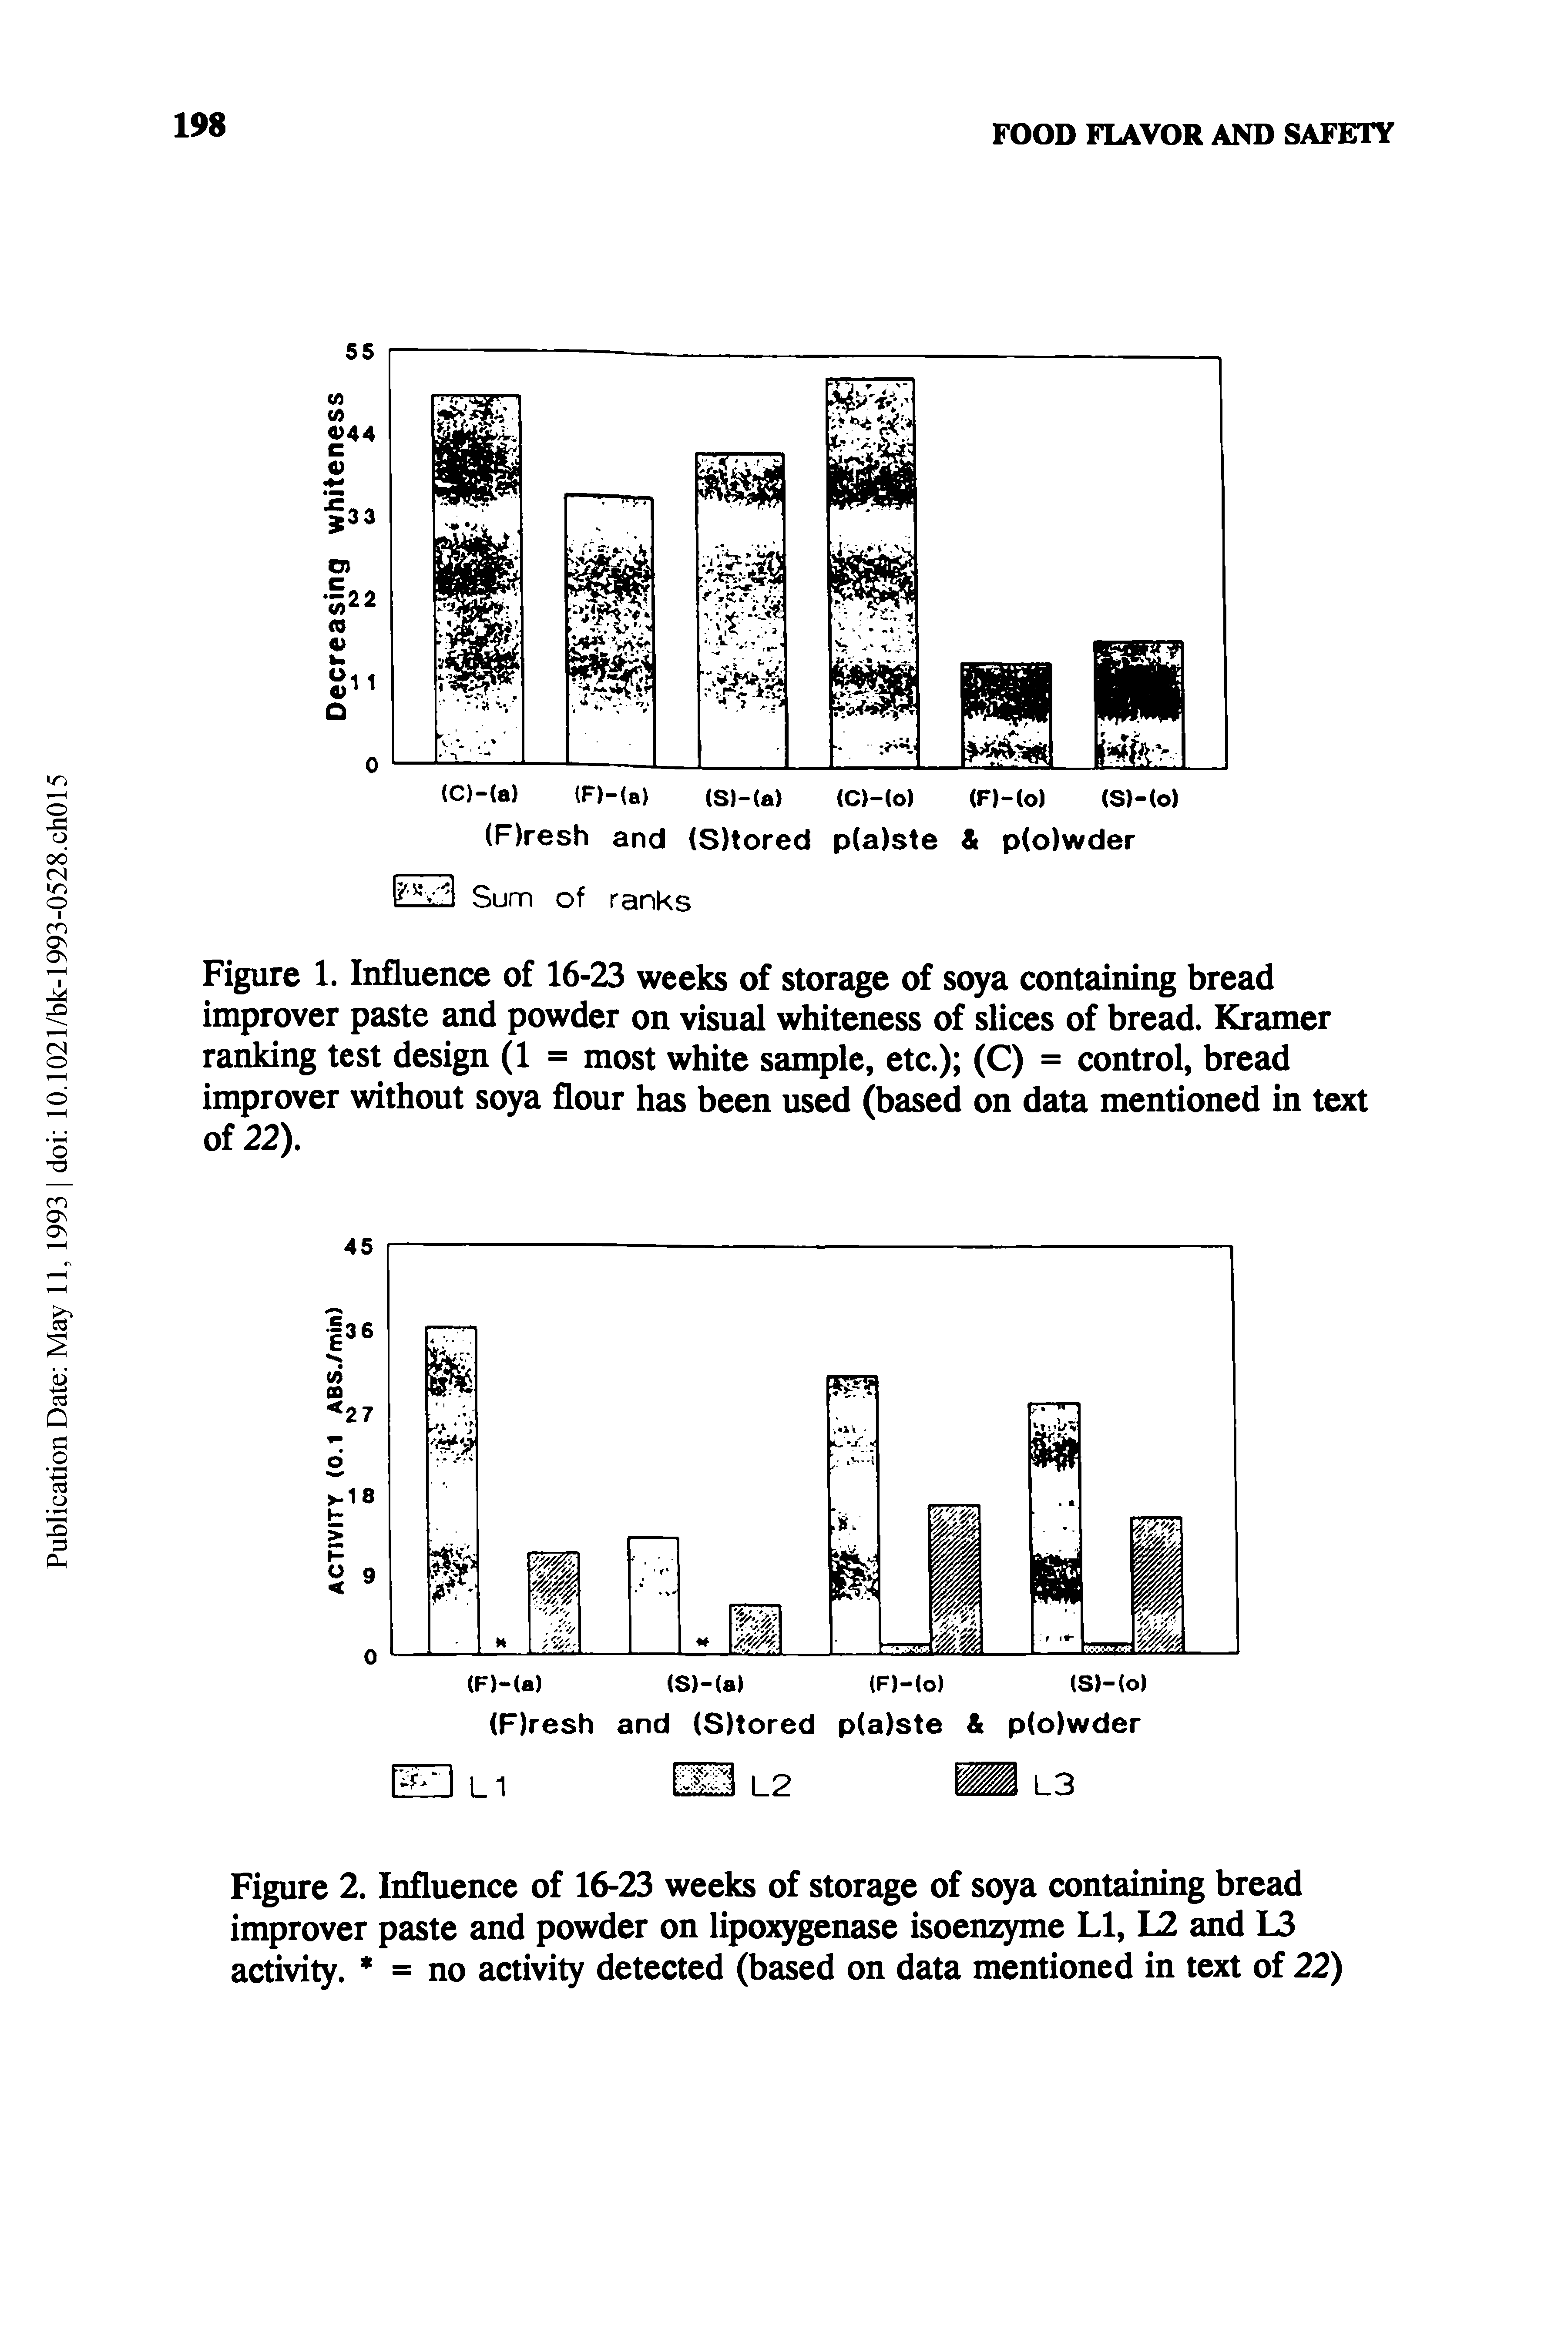 Figure 2. Influence of 16-23 weeks of storage of soya containing bread improver paste and powder on lipoxygenase isoenzyme LI, L2 and L3 activity. = no activity detected (based on data mentioned in text of 22)...